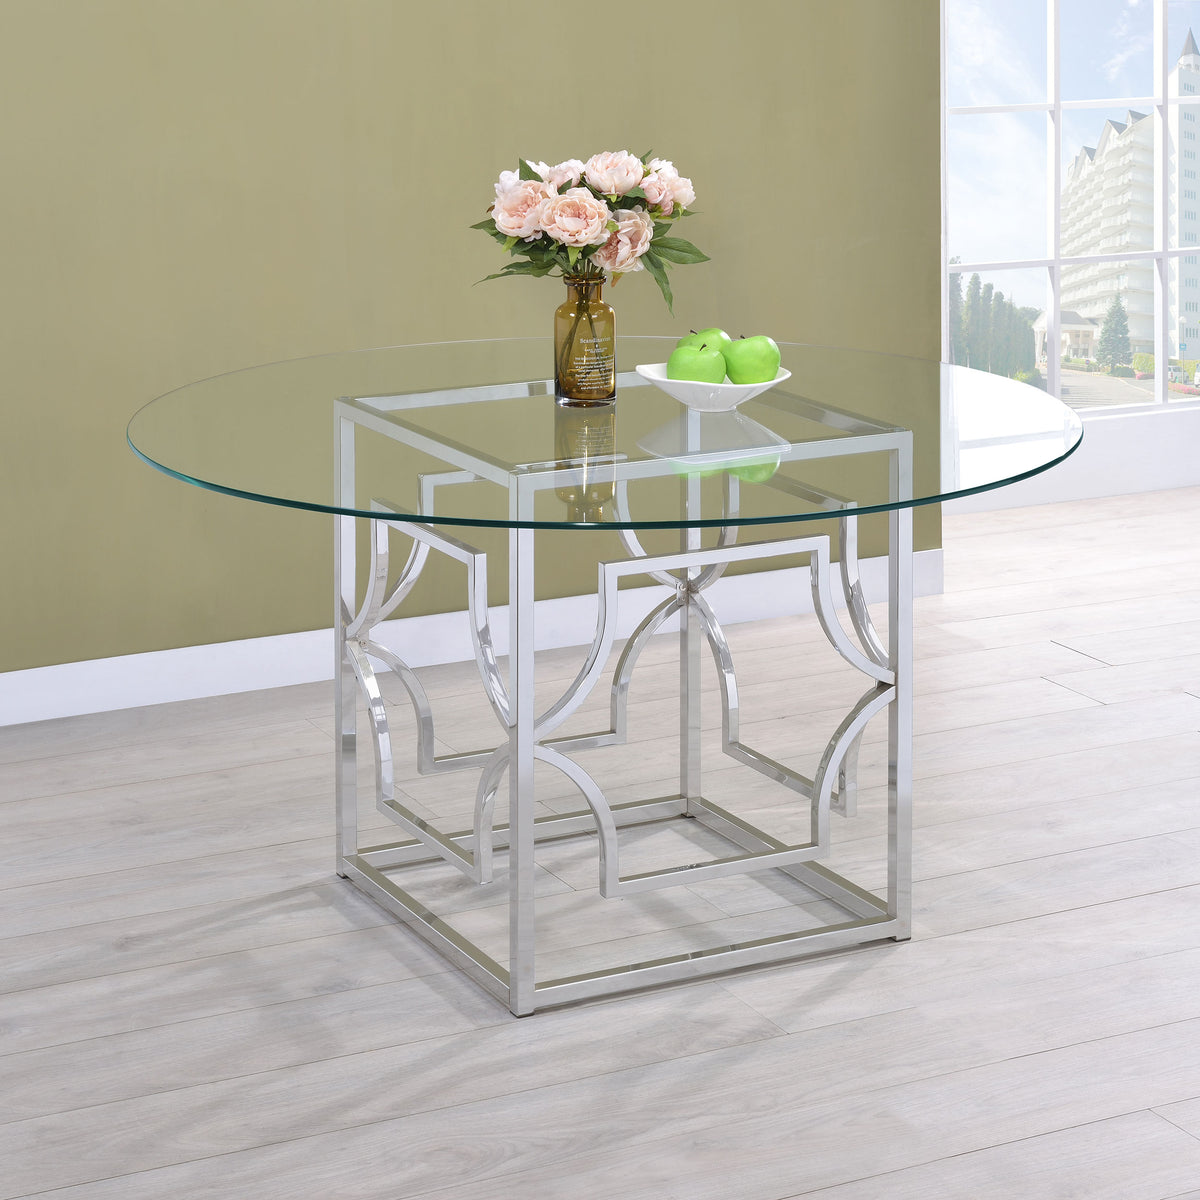 Starlight Round Glass Top Dining Table Starlight Round Glass Top Dining Table Half Price Furniture